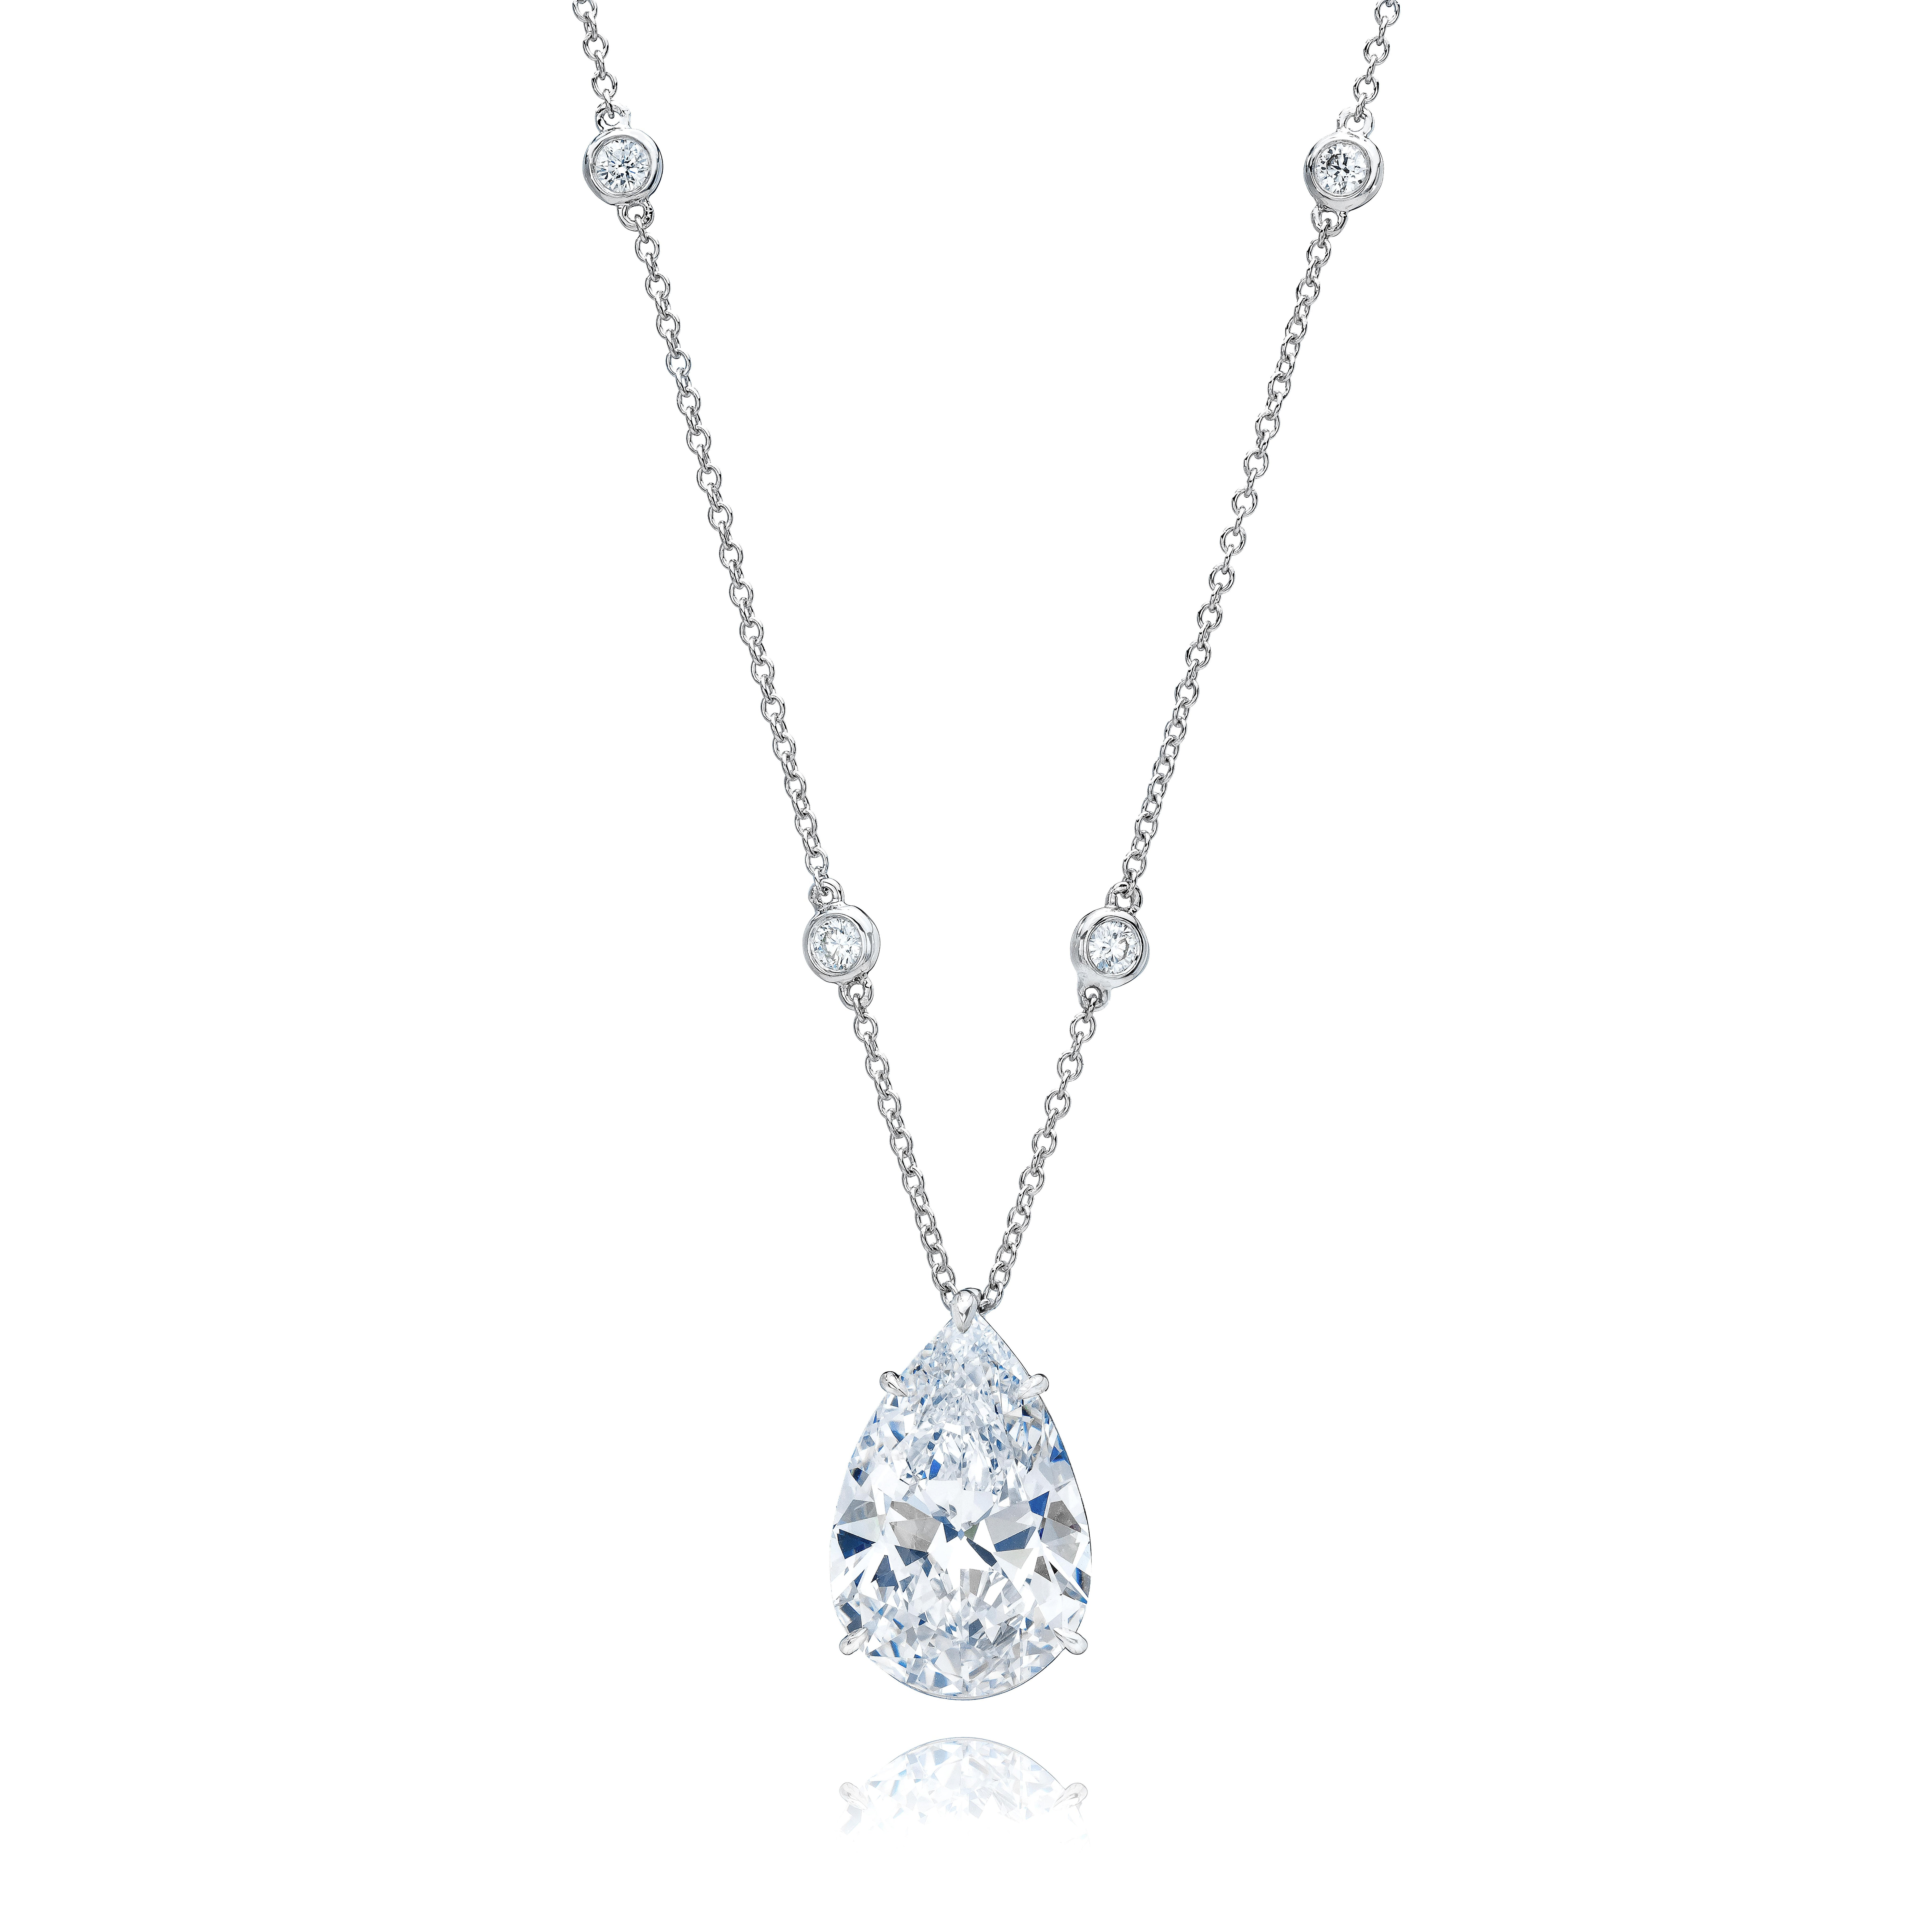 An elegant 12.12 Carat Pear shaped Diamond pendent suspended on a 18-inch platinum chain decorated with round diamonds.

Accompanied by GIA report 2201807820 stating that the diamond is E Color, Internally Flawless clarity.
Accompanied by GIA